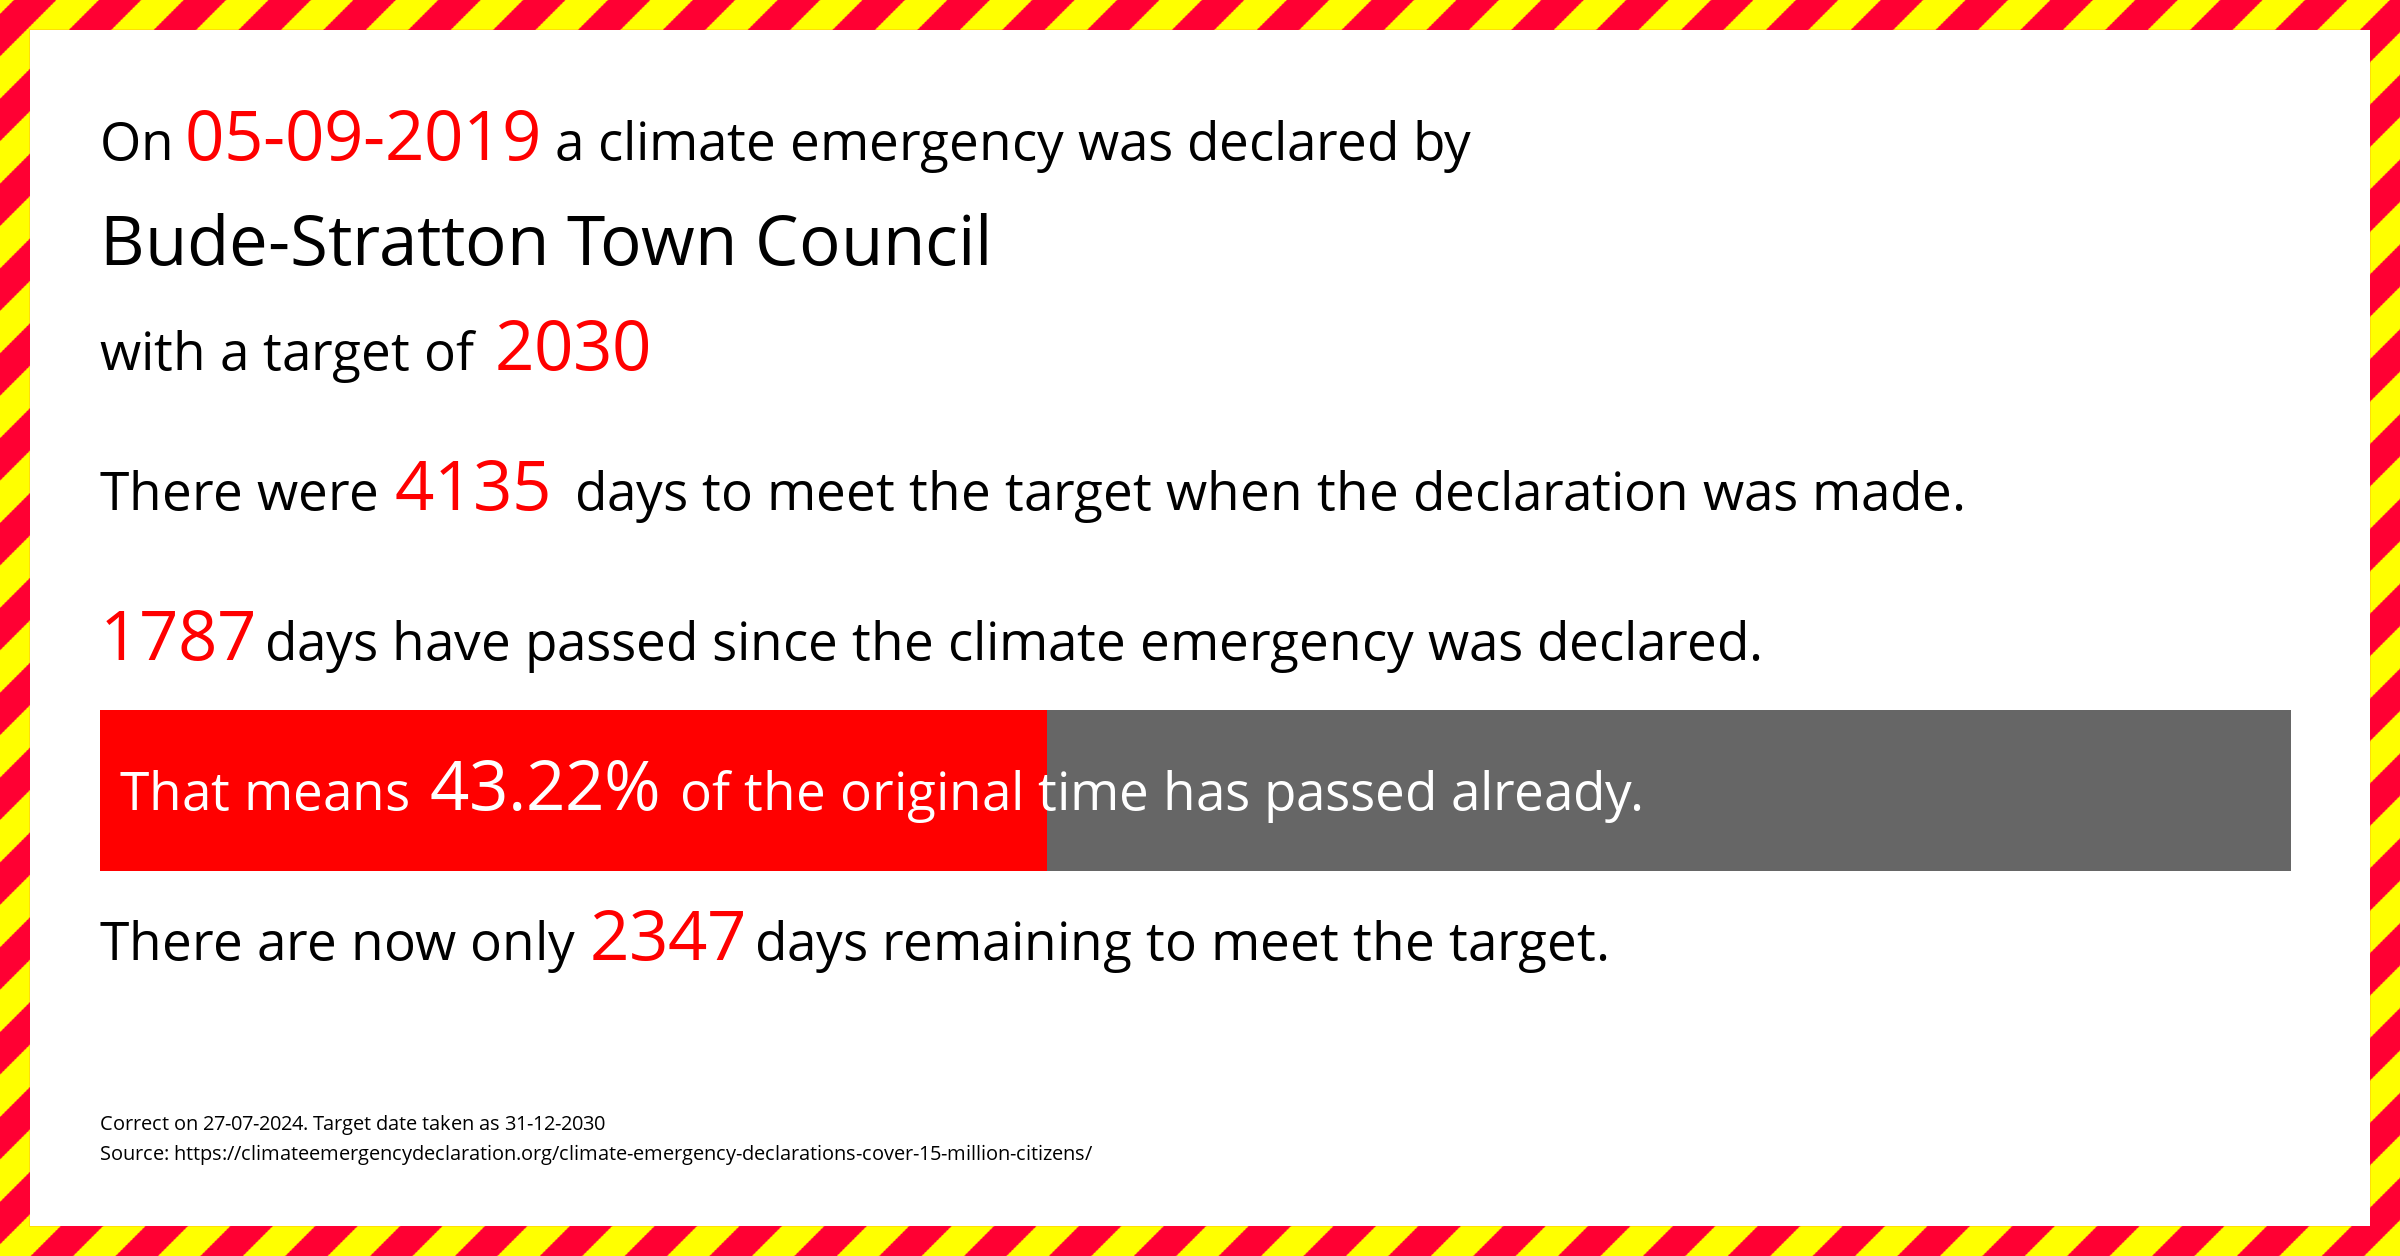 Bude-Stratton Town Council declared a Climate emergency on Thursday 5th September 2019, with a target of 2030.